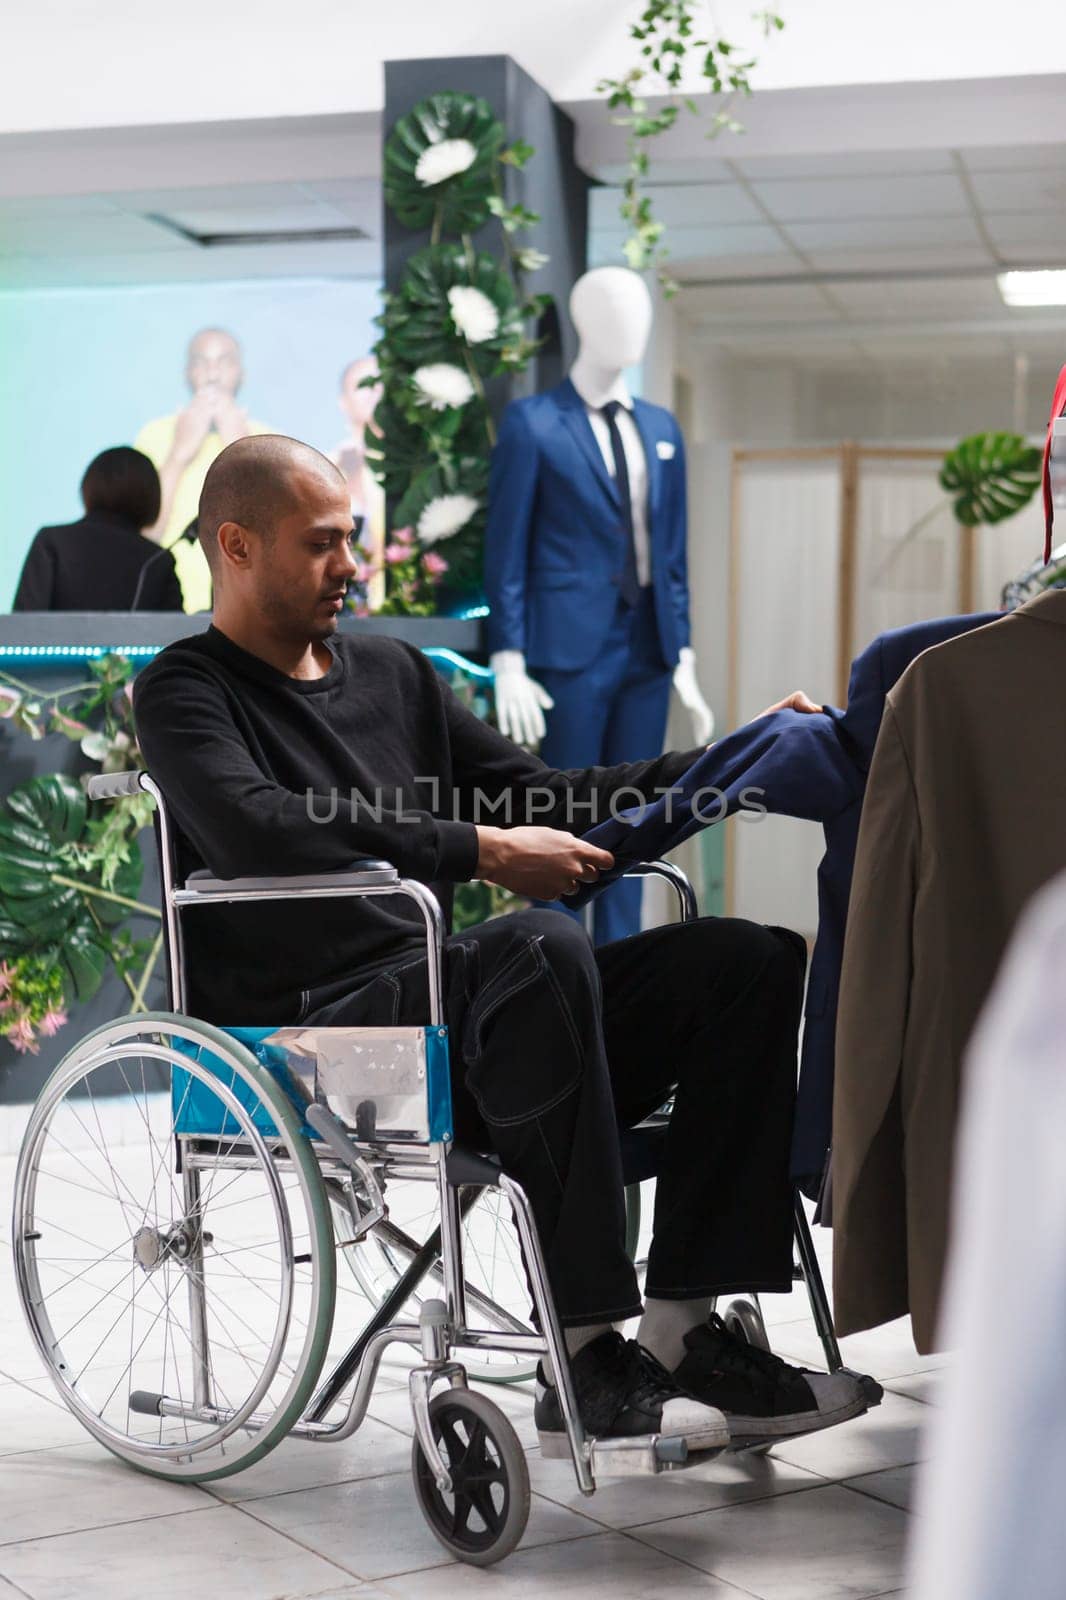 Arab man in wheelchair examining formal jacket in department store fashion showroom. Boutique client with disability browsing through apparel rack while shopping for outfit